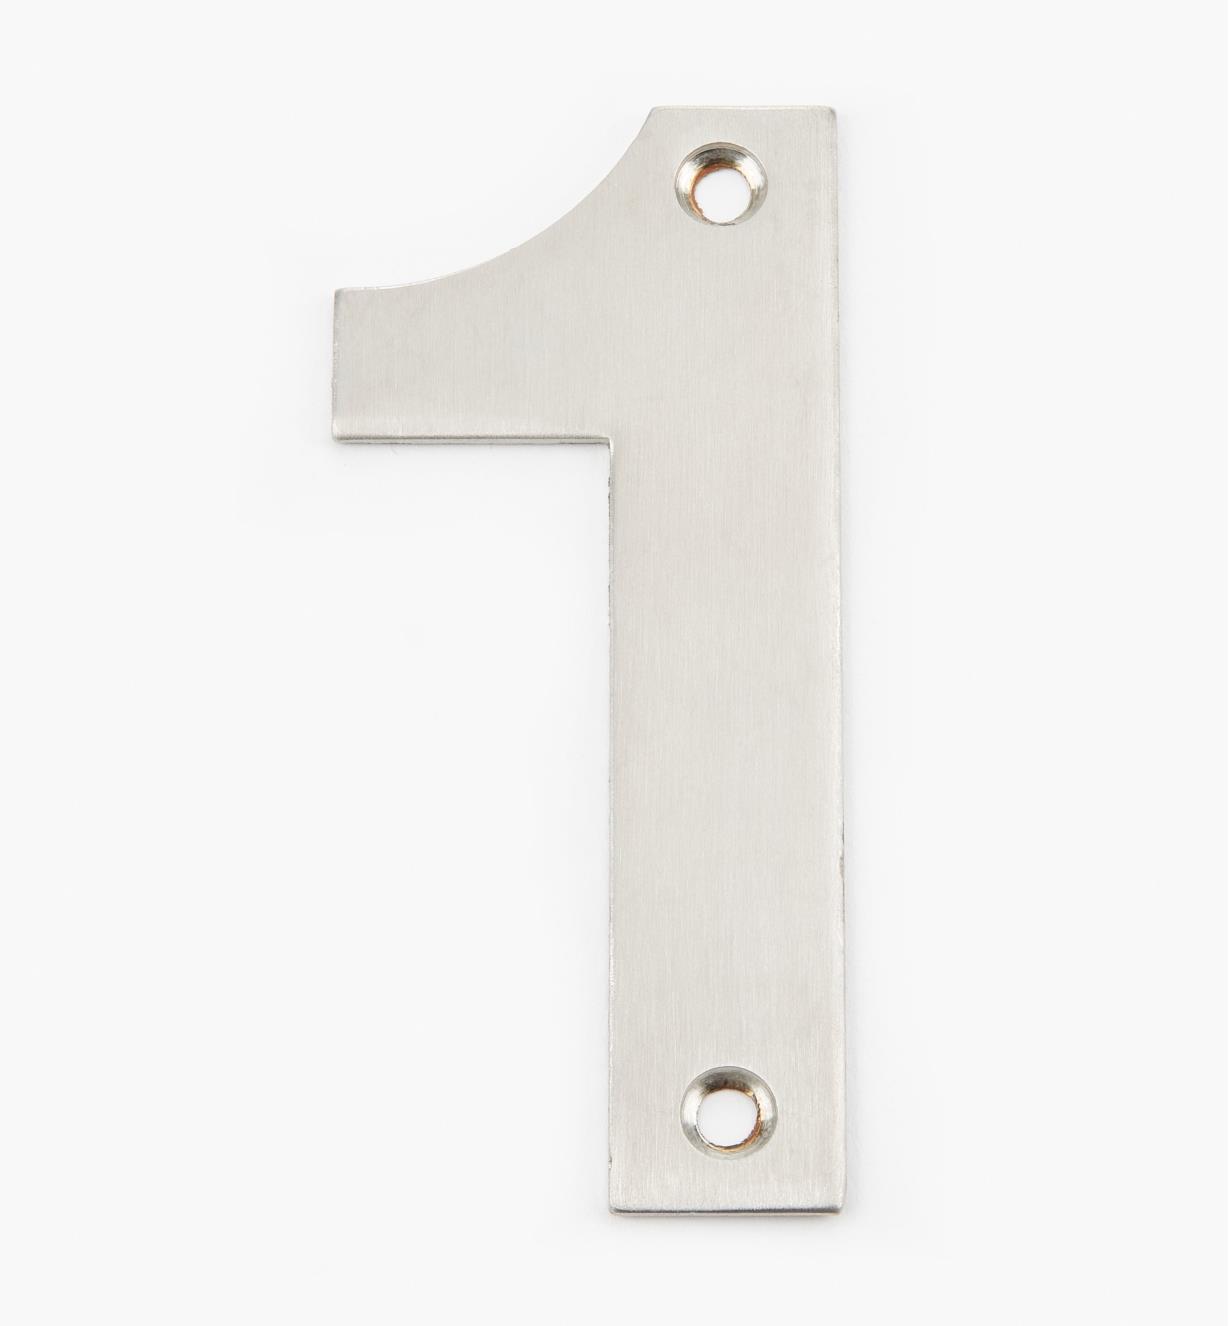 Stainless Steel House Numbers No 7 SCREW on House Door Building 10cm 